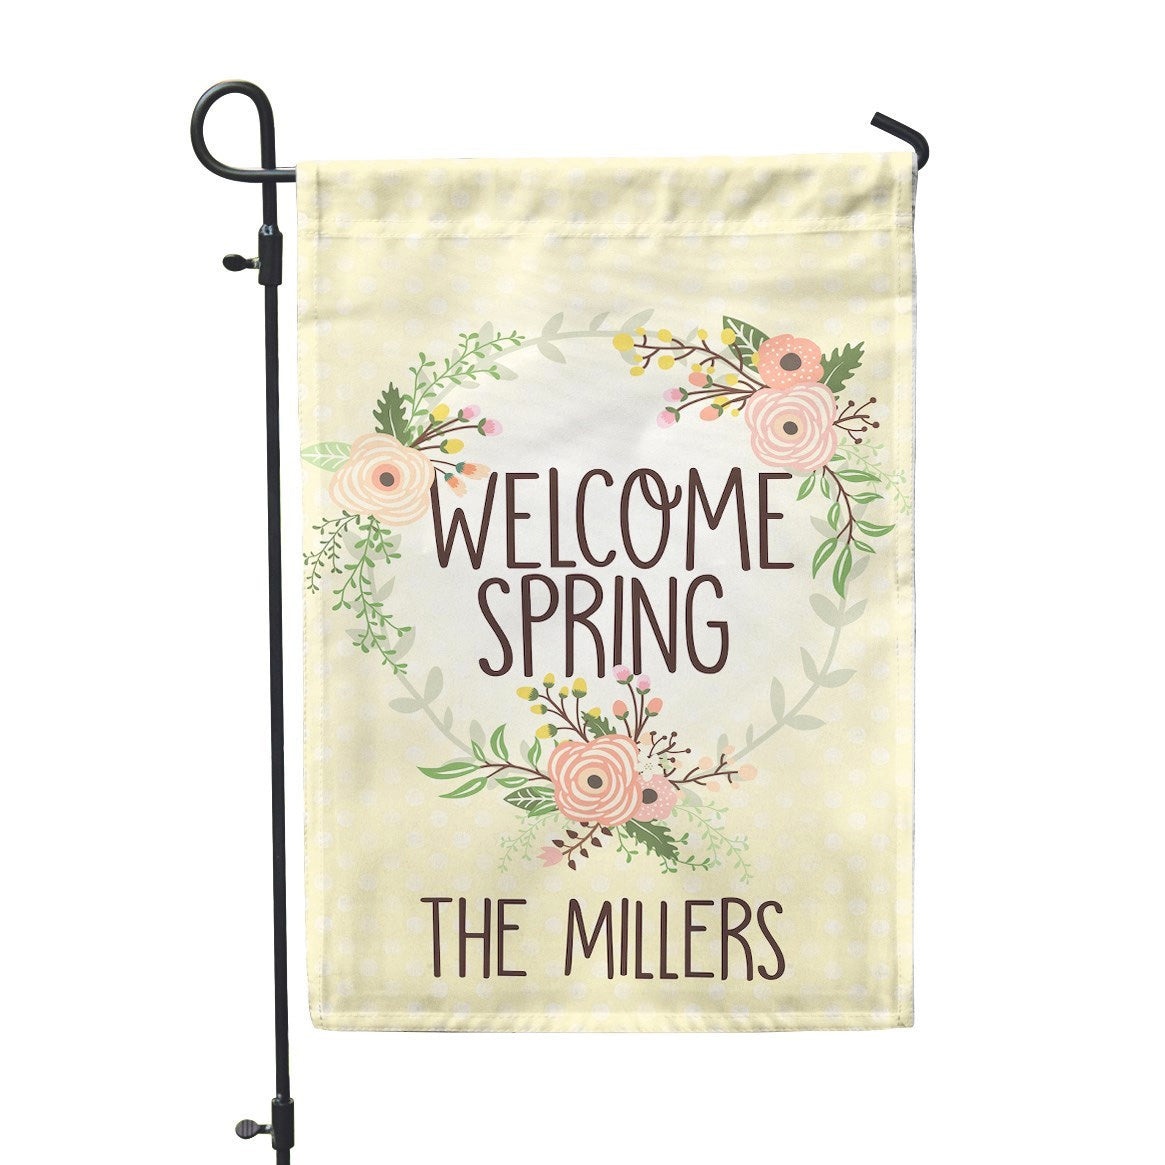 Personalized Garden Flag - Welcome Spring Custom Home Flag - 12" x 18" - Second East